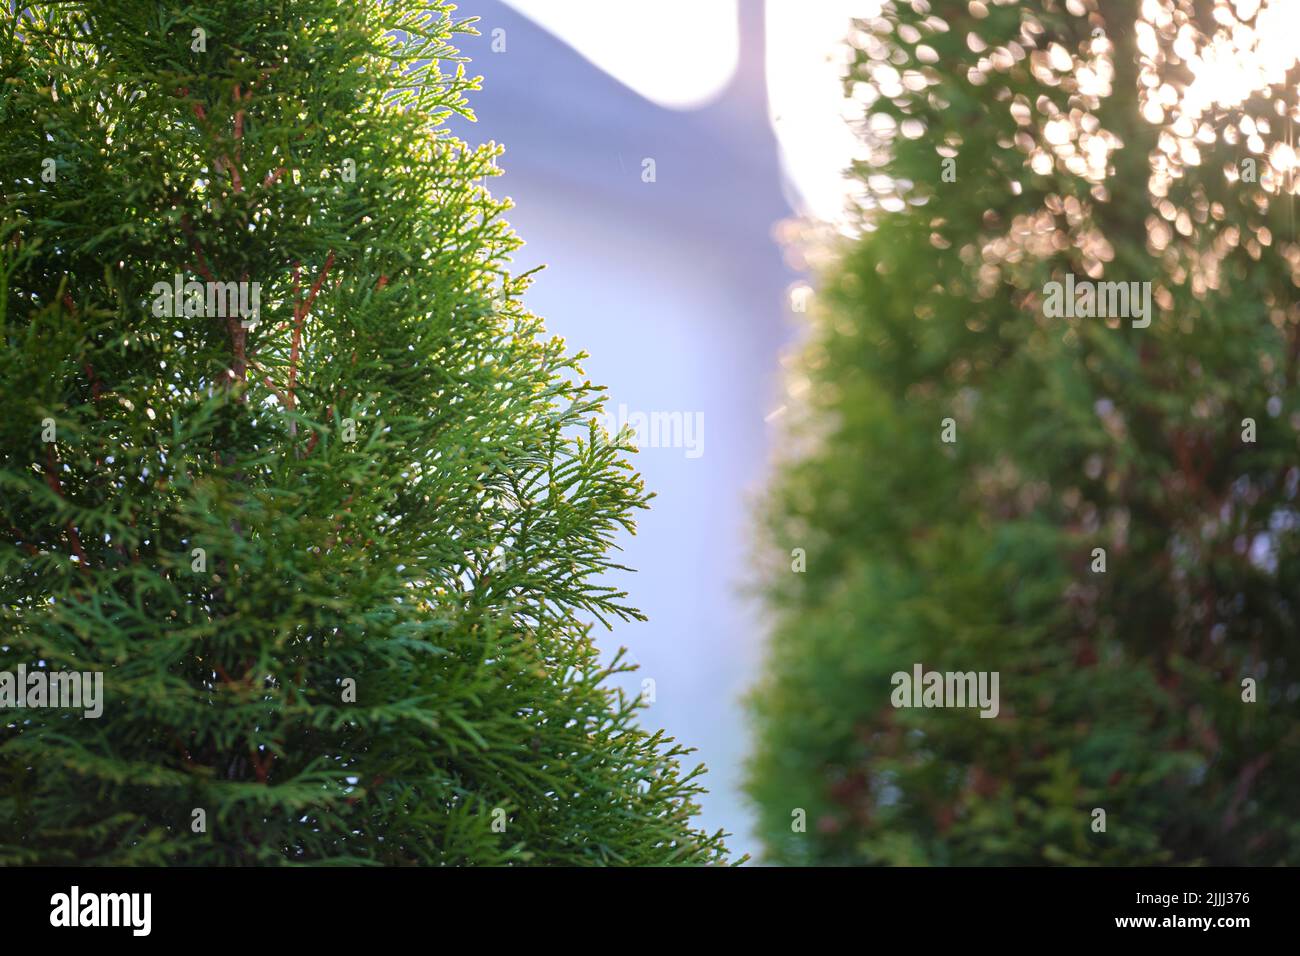 Evergreen decorative thuja trees growing in front of the house or in backyard. Gardening and landscaping concept Stock Photo